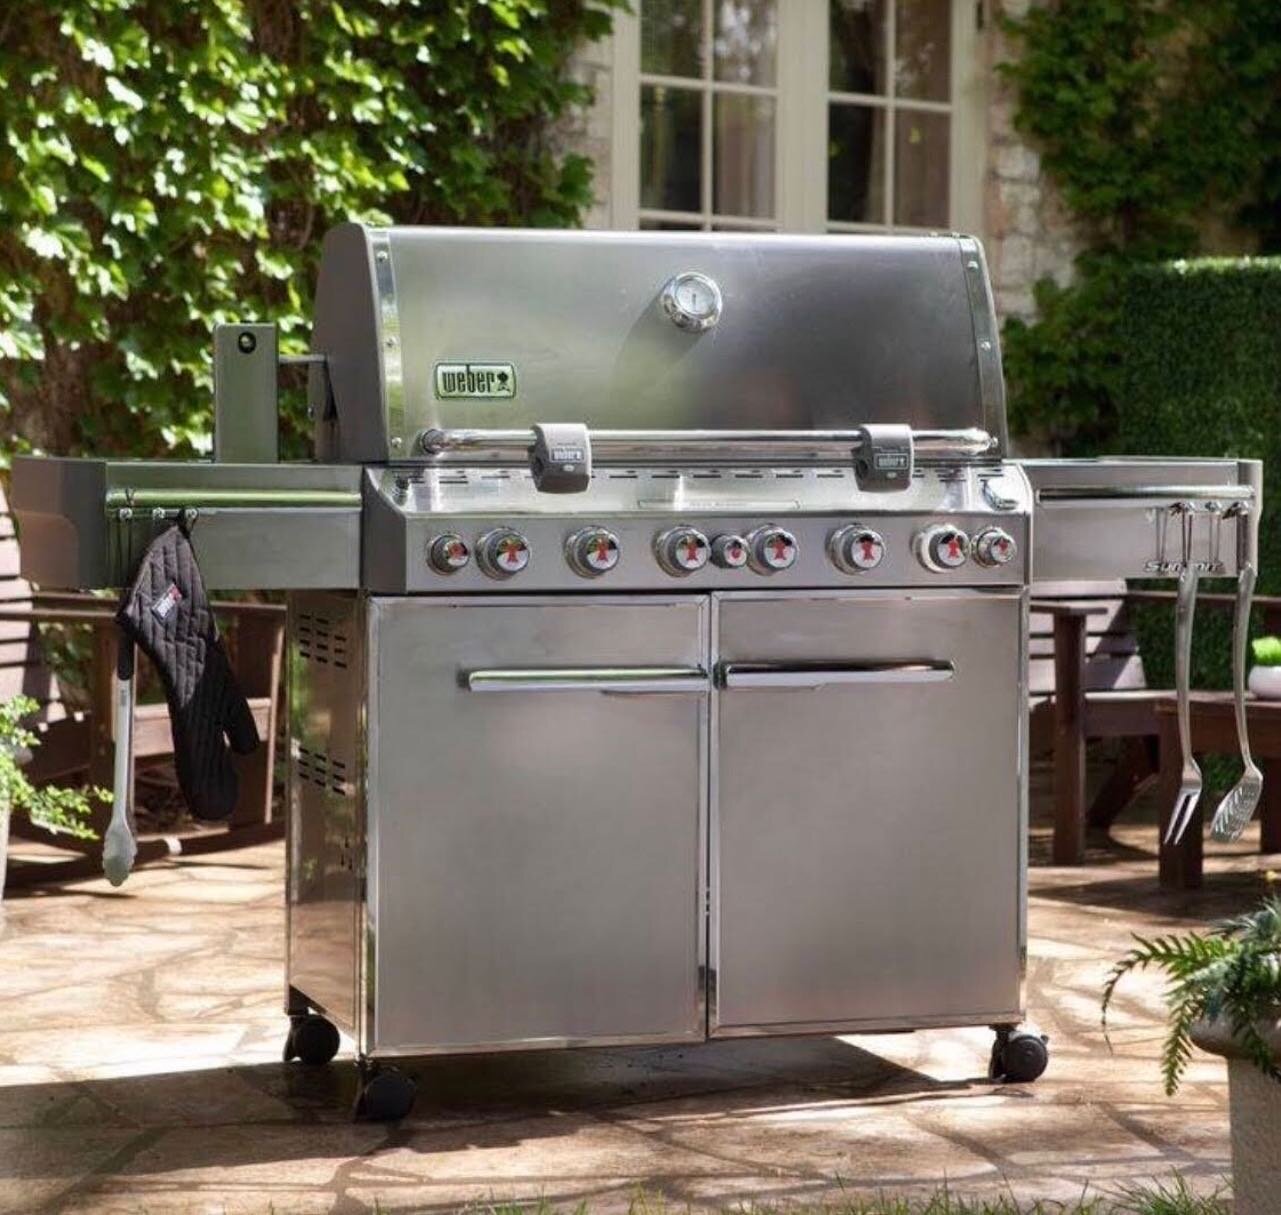 The epitome of outdoor grilling. 💥 Our summer promo is on, purchase a @webergrills Summit or Genesis series and receive a $100 #dundeegardens gift card {+ complementary local delivery}

#webergenesis #webergrill #summergrilling #outdoordining #summe